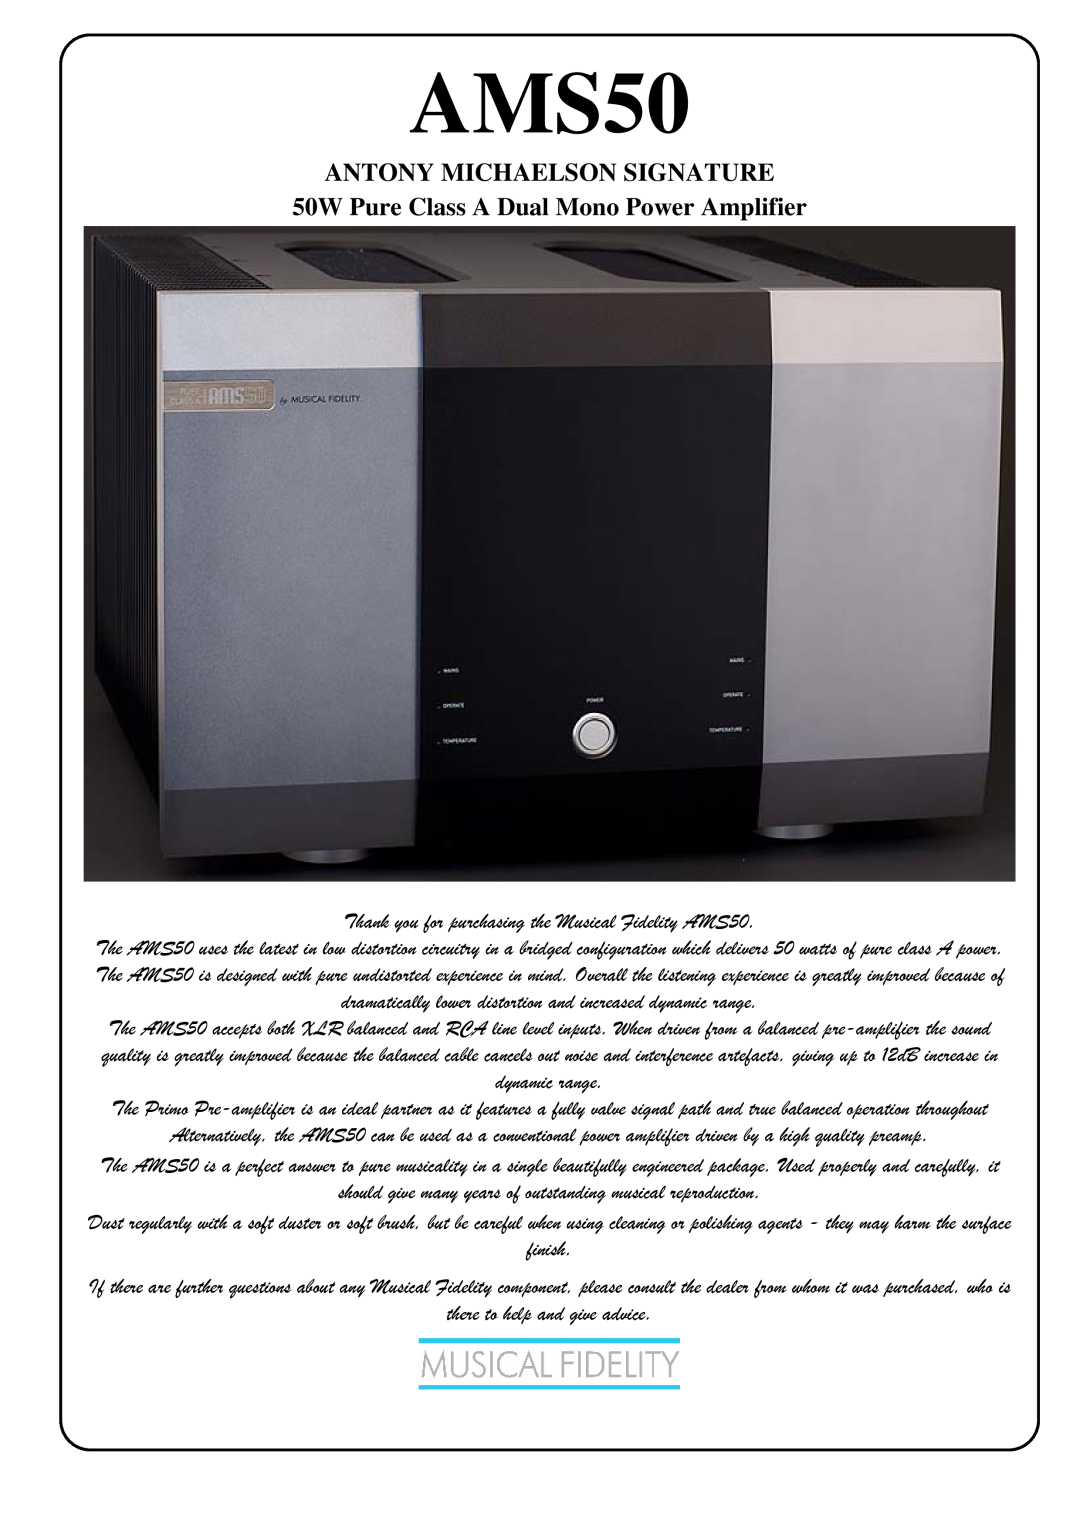 Musical Fidelity AMS50 manual Antony Michaelson Signature, 50W Pure Class A Dual Mono Power Amplifier 